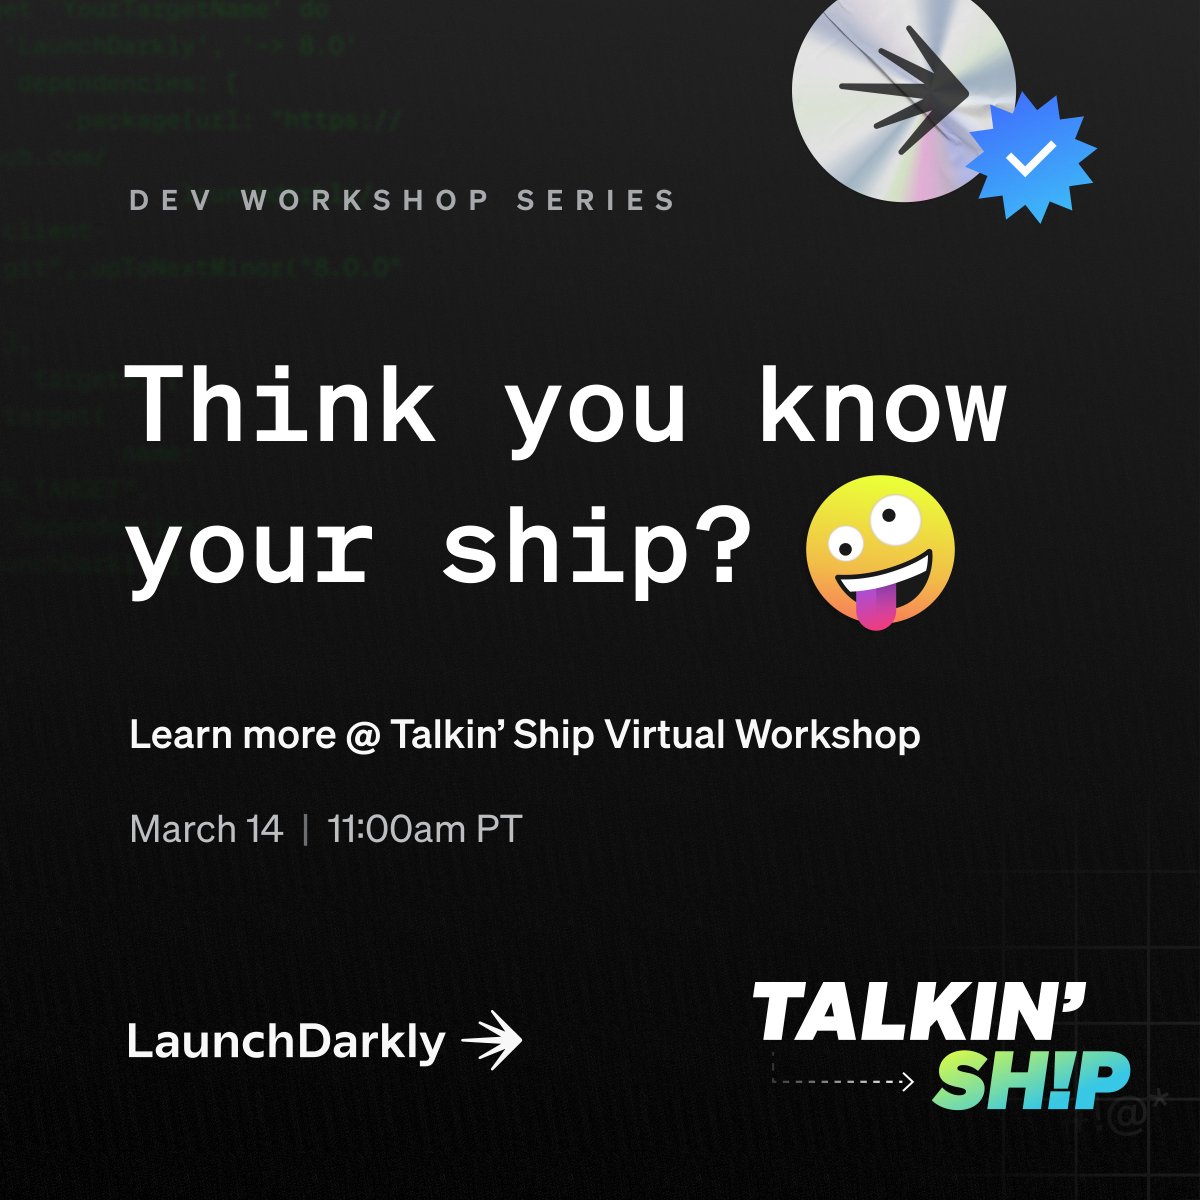 Get your laptop - we're Talkin' Ship! Join us tomorrow 3/14 for a virtual developer workshop 🔧👩🏽‍💻 Get hands-on with real code and learn how to roll out a whole new digital experience for eCommerce customers! launchdarkly.com/talkin-ship